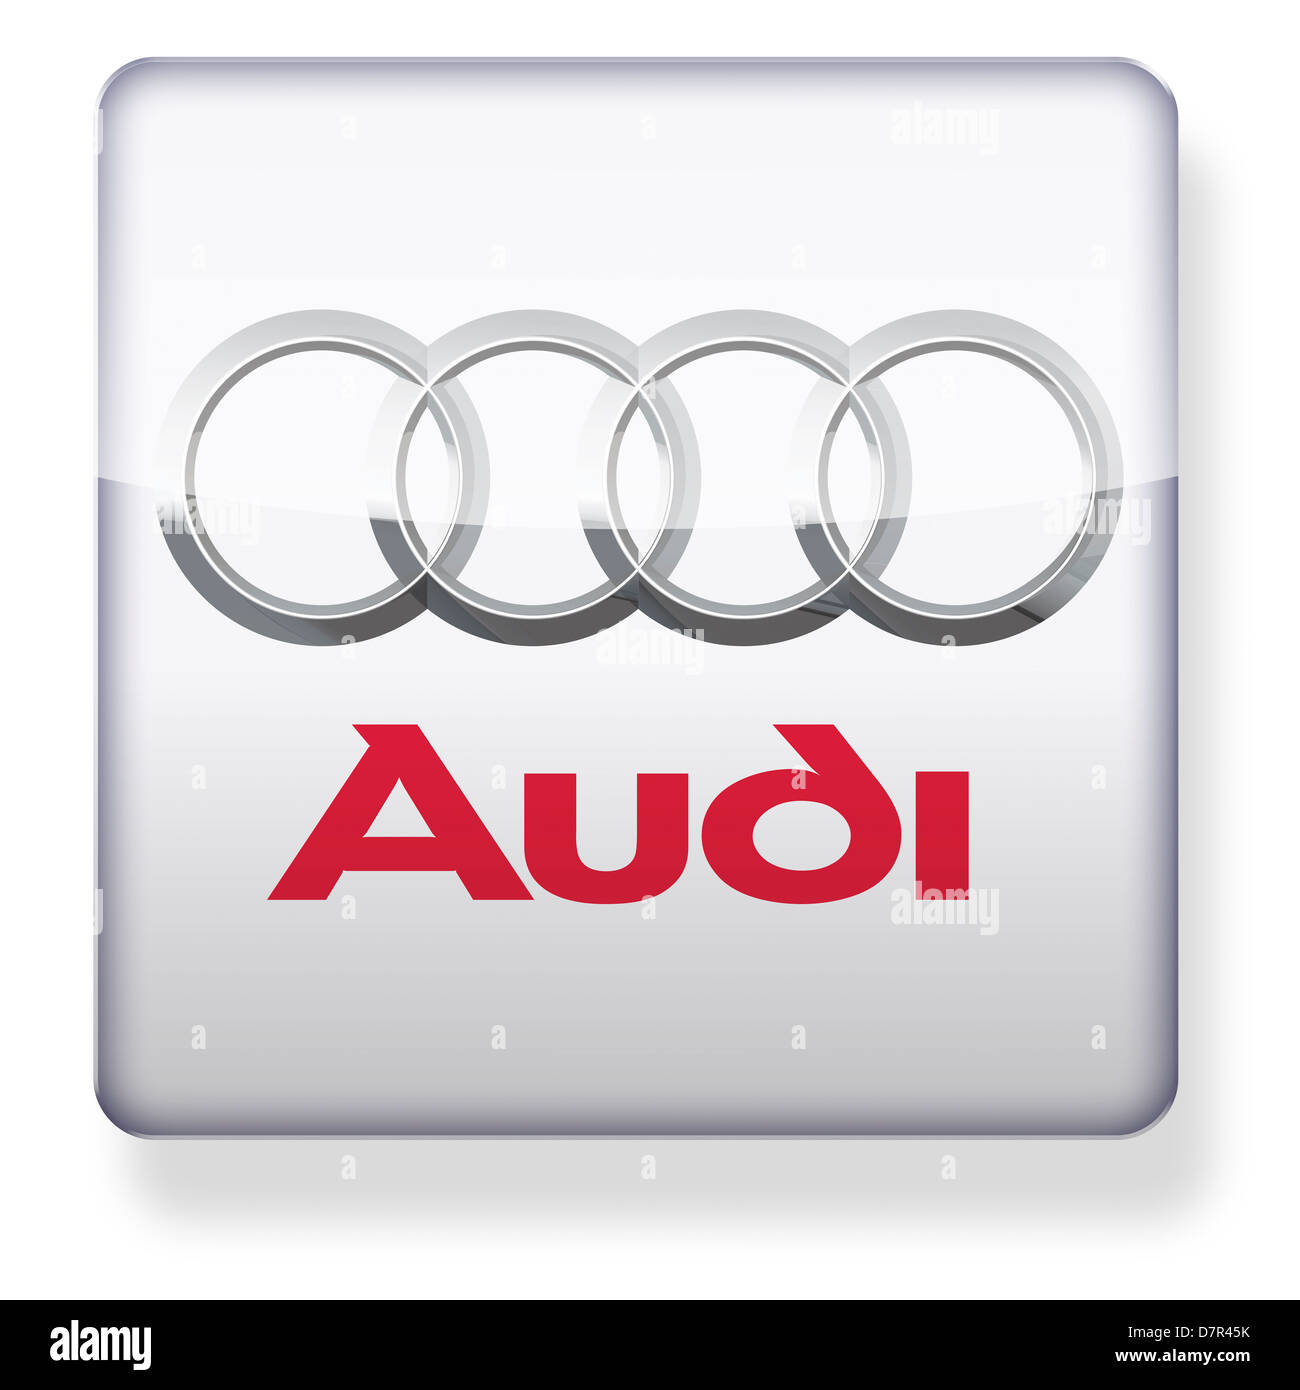 Audi logo as an app icon. Clipping path included. Stock Photo